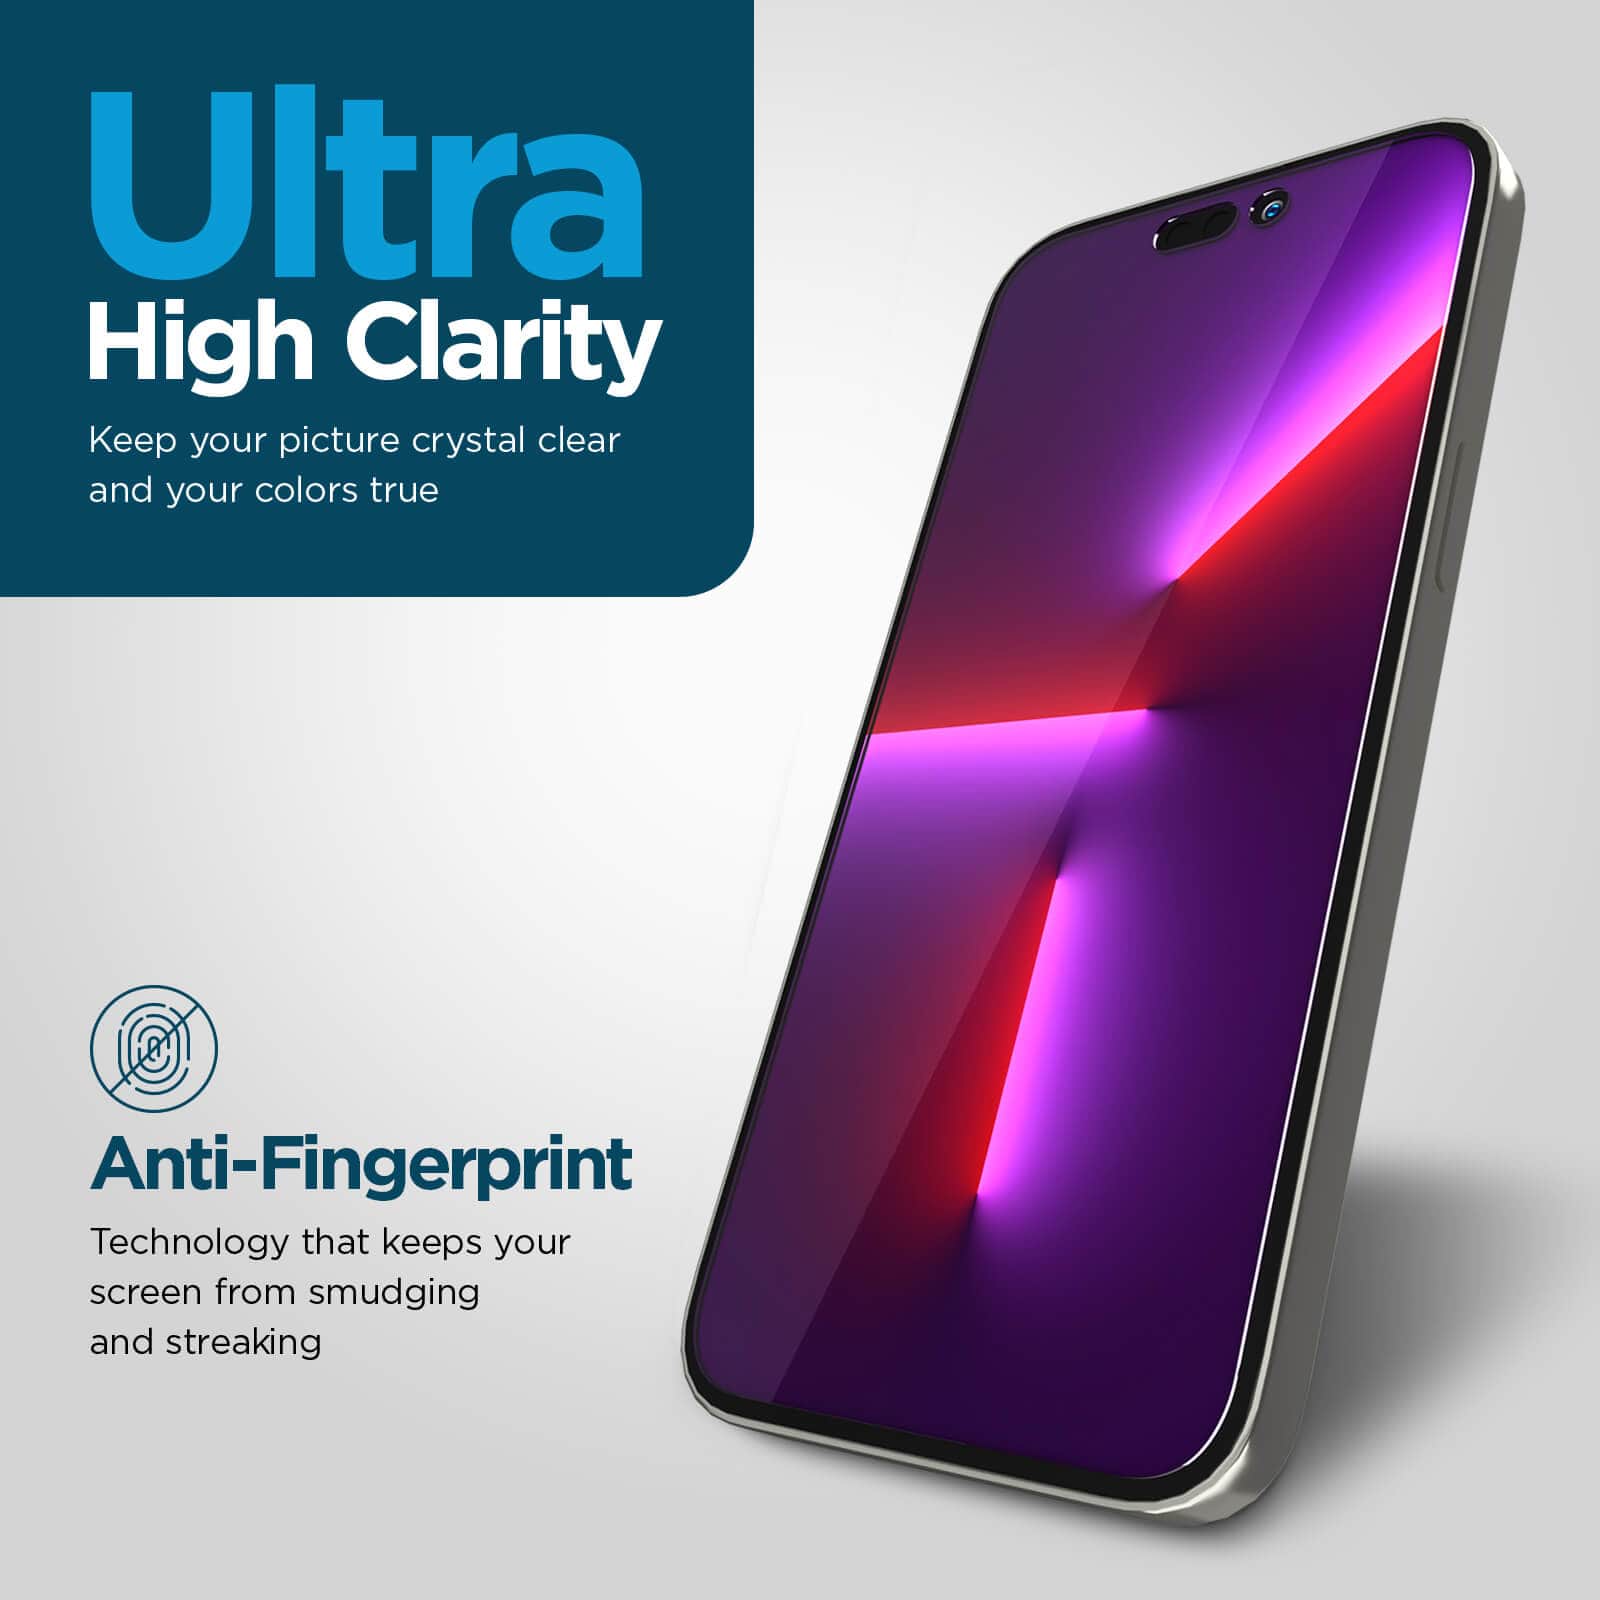 Ultra high clarity keeps your picture crystal clear and your colors true. Anti-fingerprint technology that keeps your screen from smudging and streaking. color::Clear